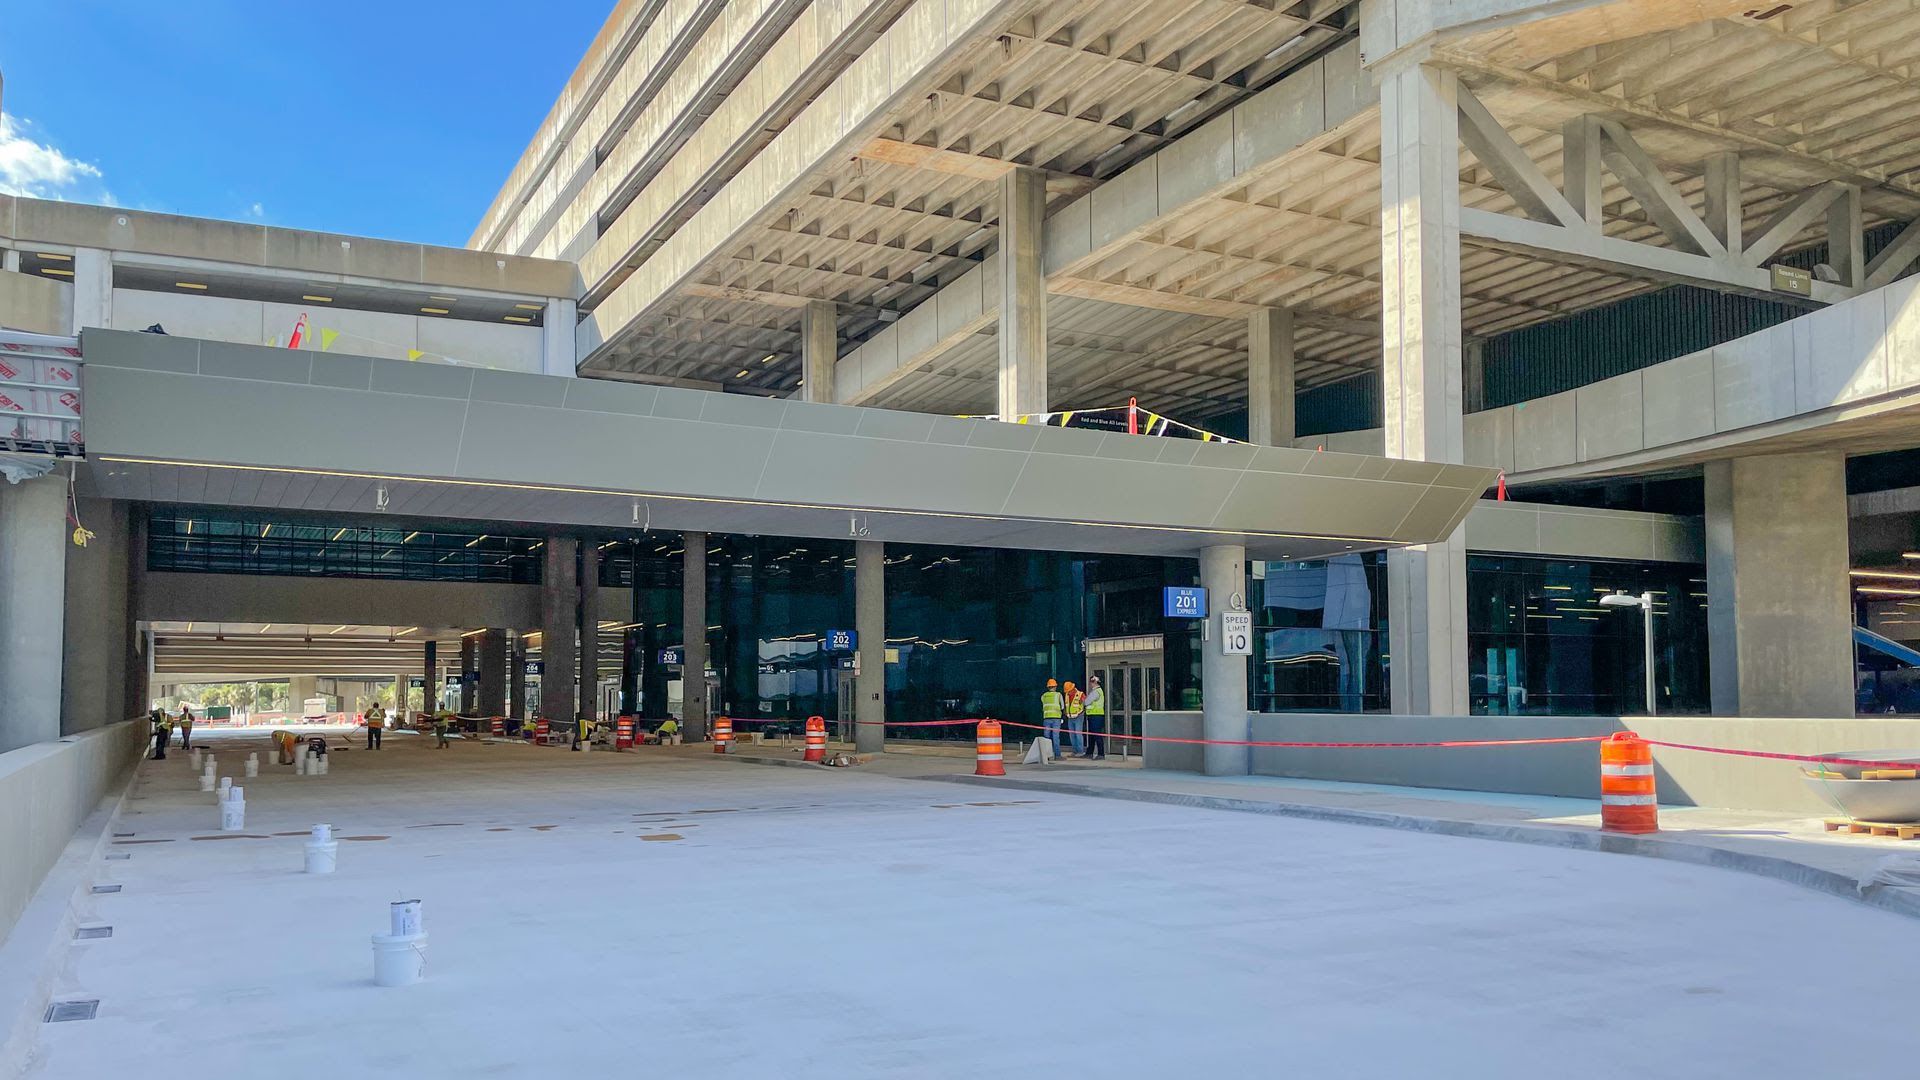 Construction of a bridge and escalator that is nearing completion on the new Blue Express Curbsides at Tampa International Airport. 